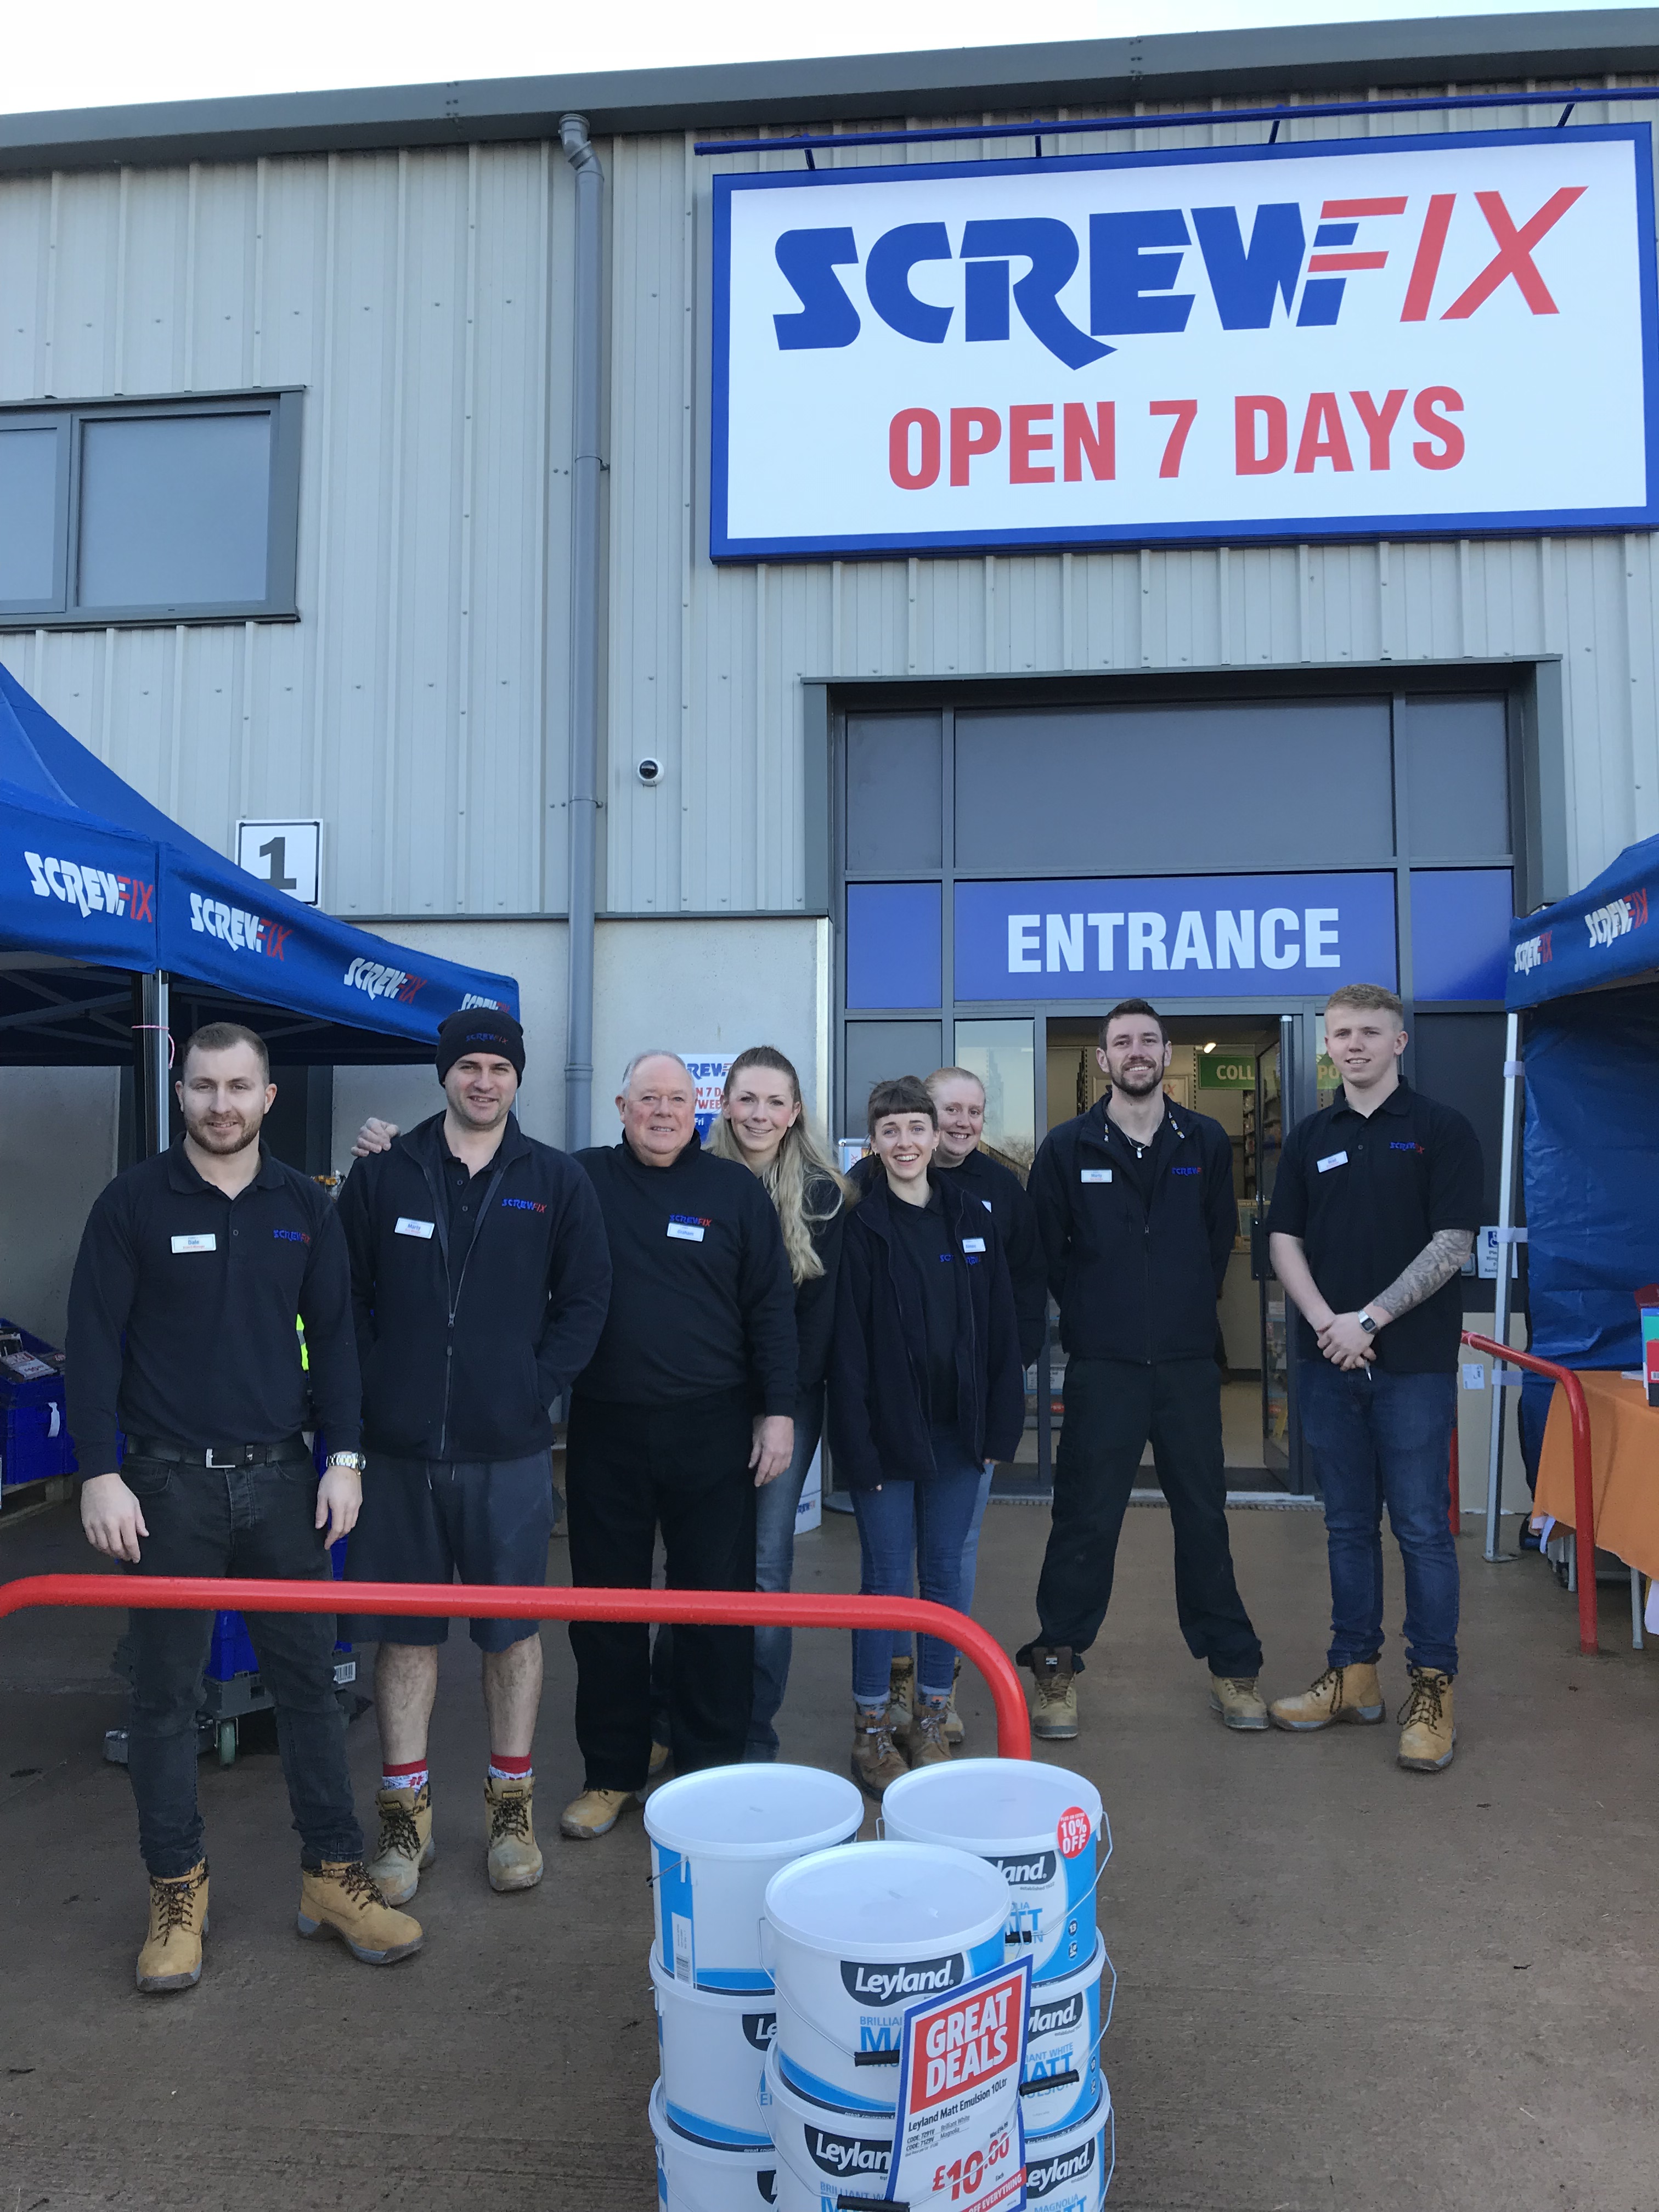 Ilminster Celebrates New Screwfix Store Opening